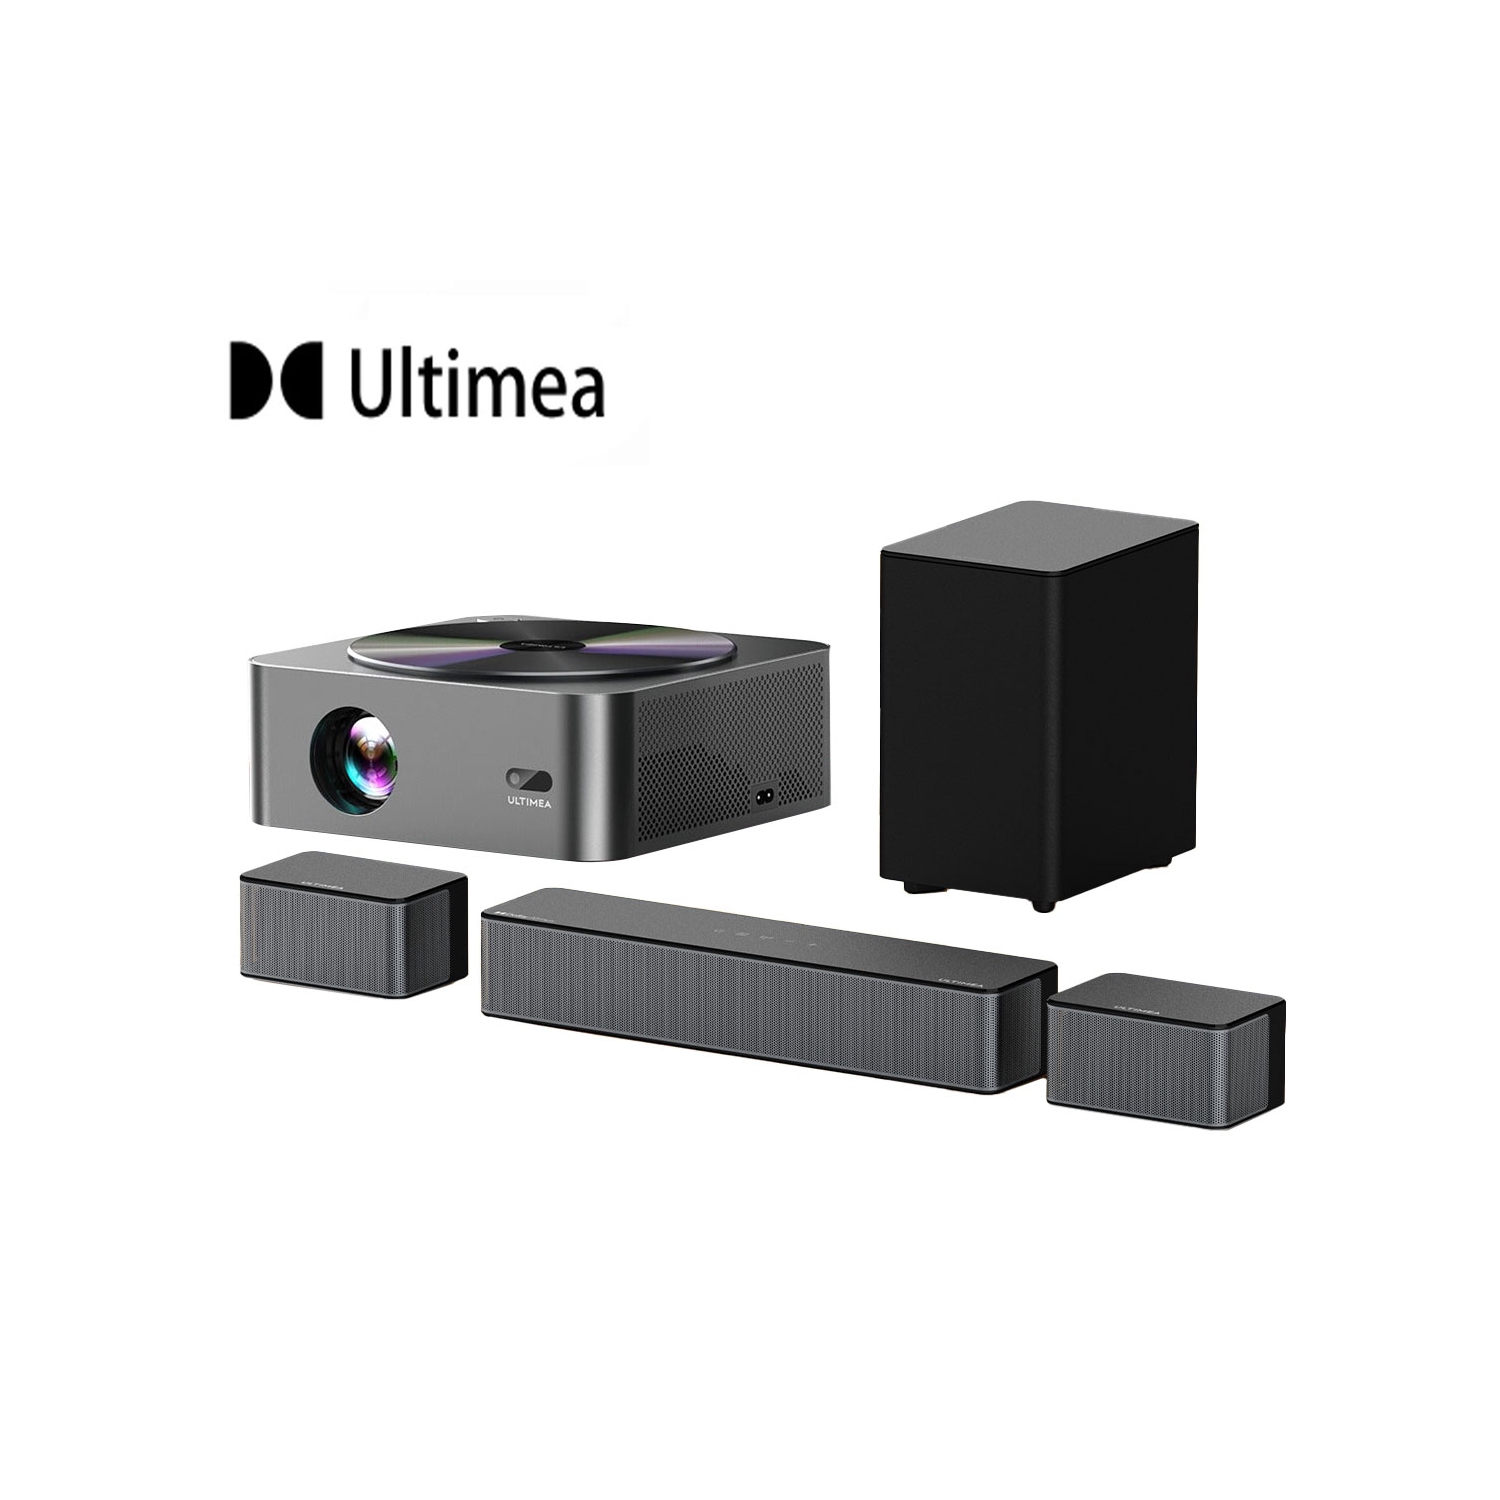 Ultimea Apollo P40 Projector Review - Elevate Your Viewing Experience